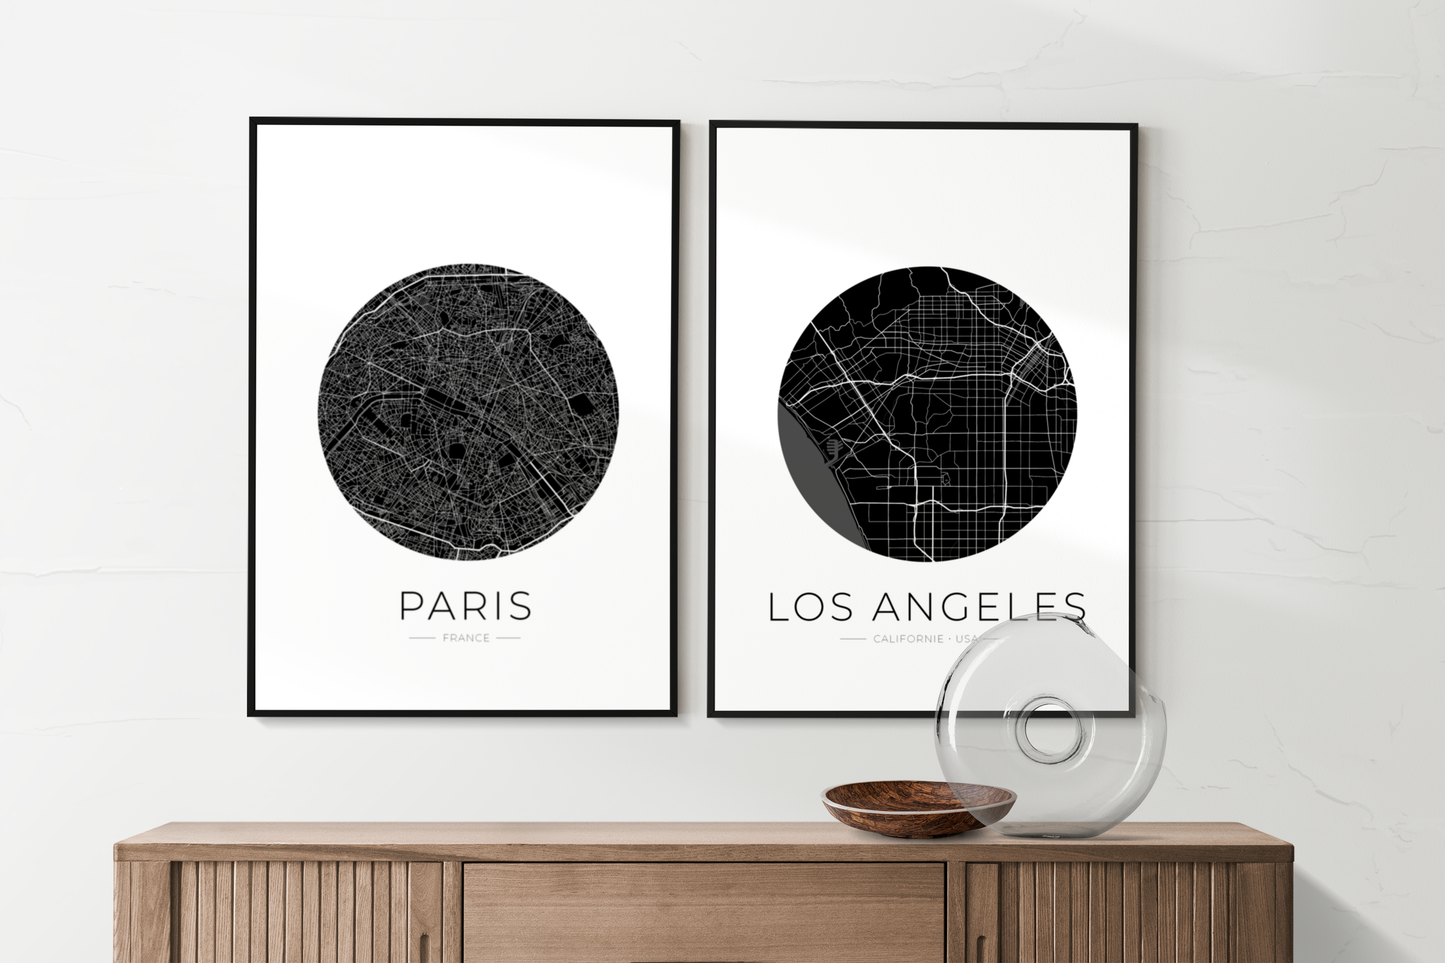 Paris City Map poster - city of France poster - art map - black and white design - living room decoration - customizable - Parisian - travel